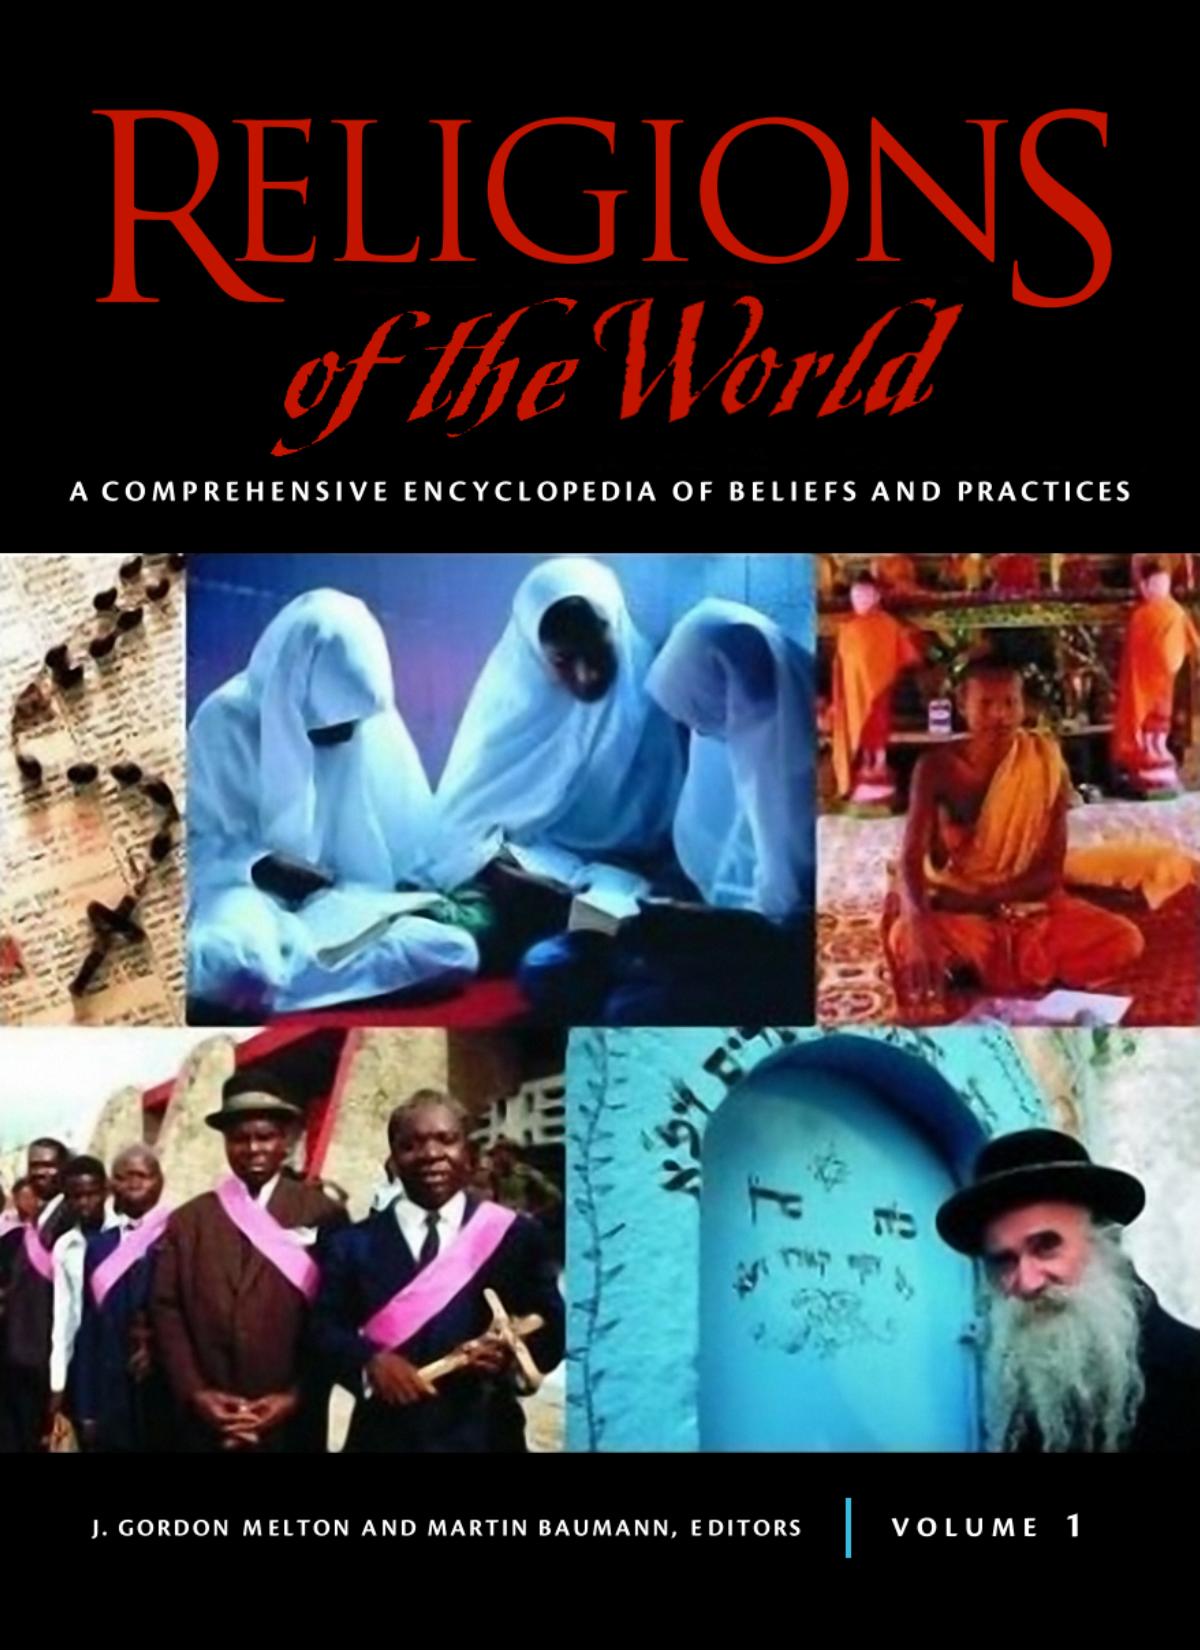 Religions of the World: A Comprehensive Encyclopedia of Beliefs and Practices